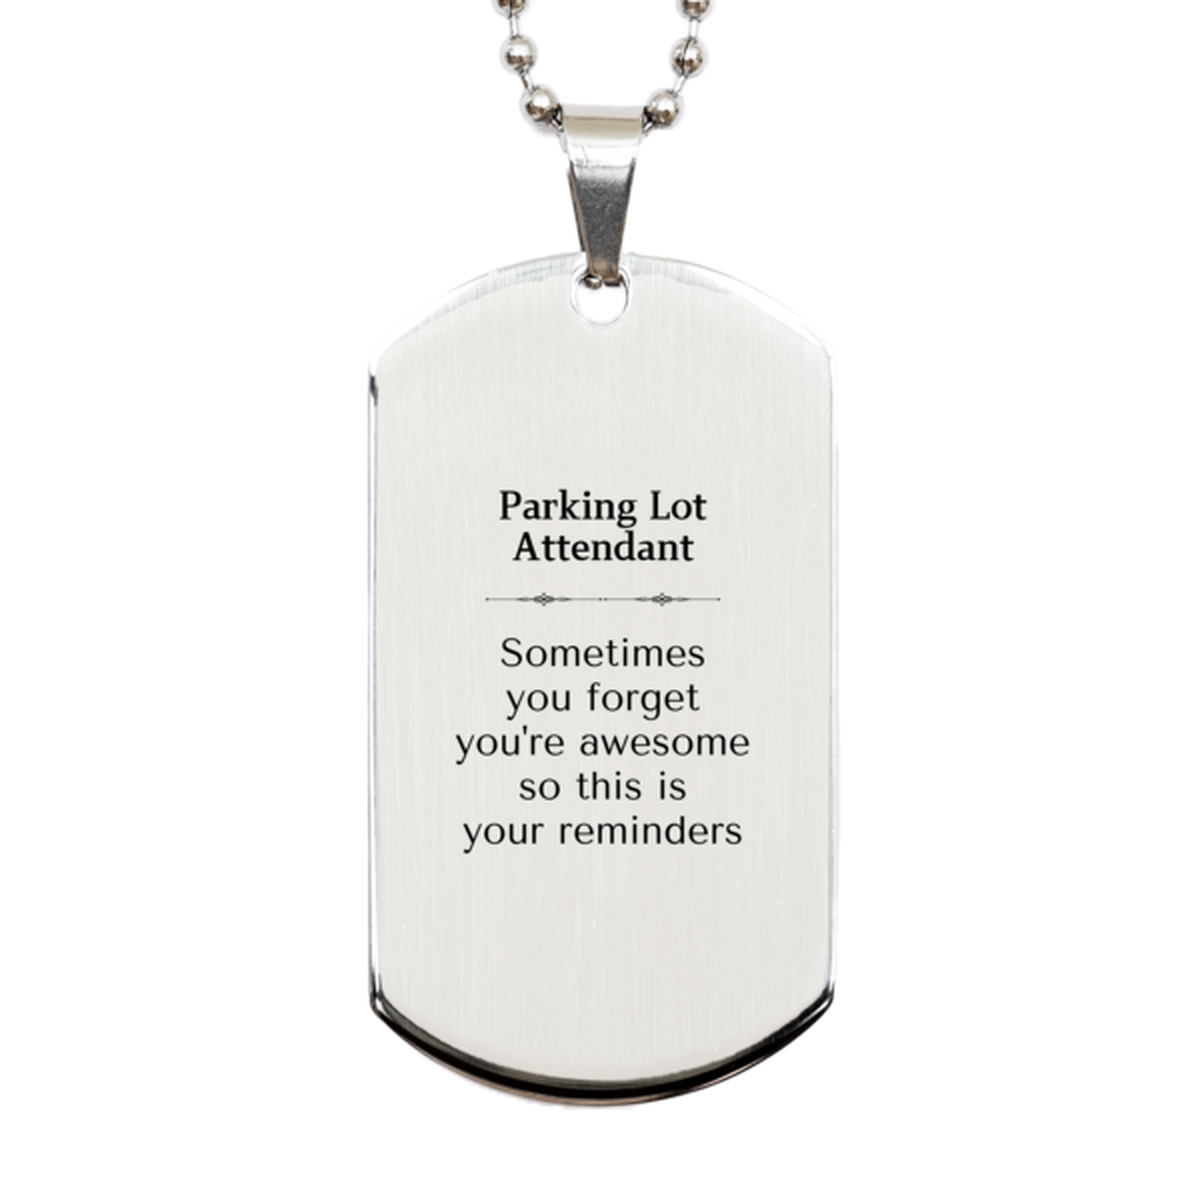 Sentimental Parking Lot Attendant Silver Dog Tag, Parking Lot Attendant Sometimes you forget you're awesome so this is your reminders, Graduation Christmas Birthday Gifts for Parking Lot Attendant, Men, Women, Coworkers